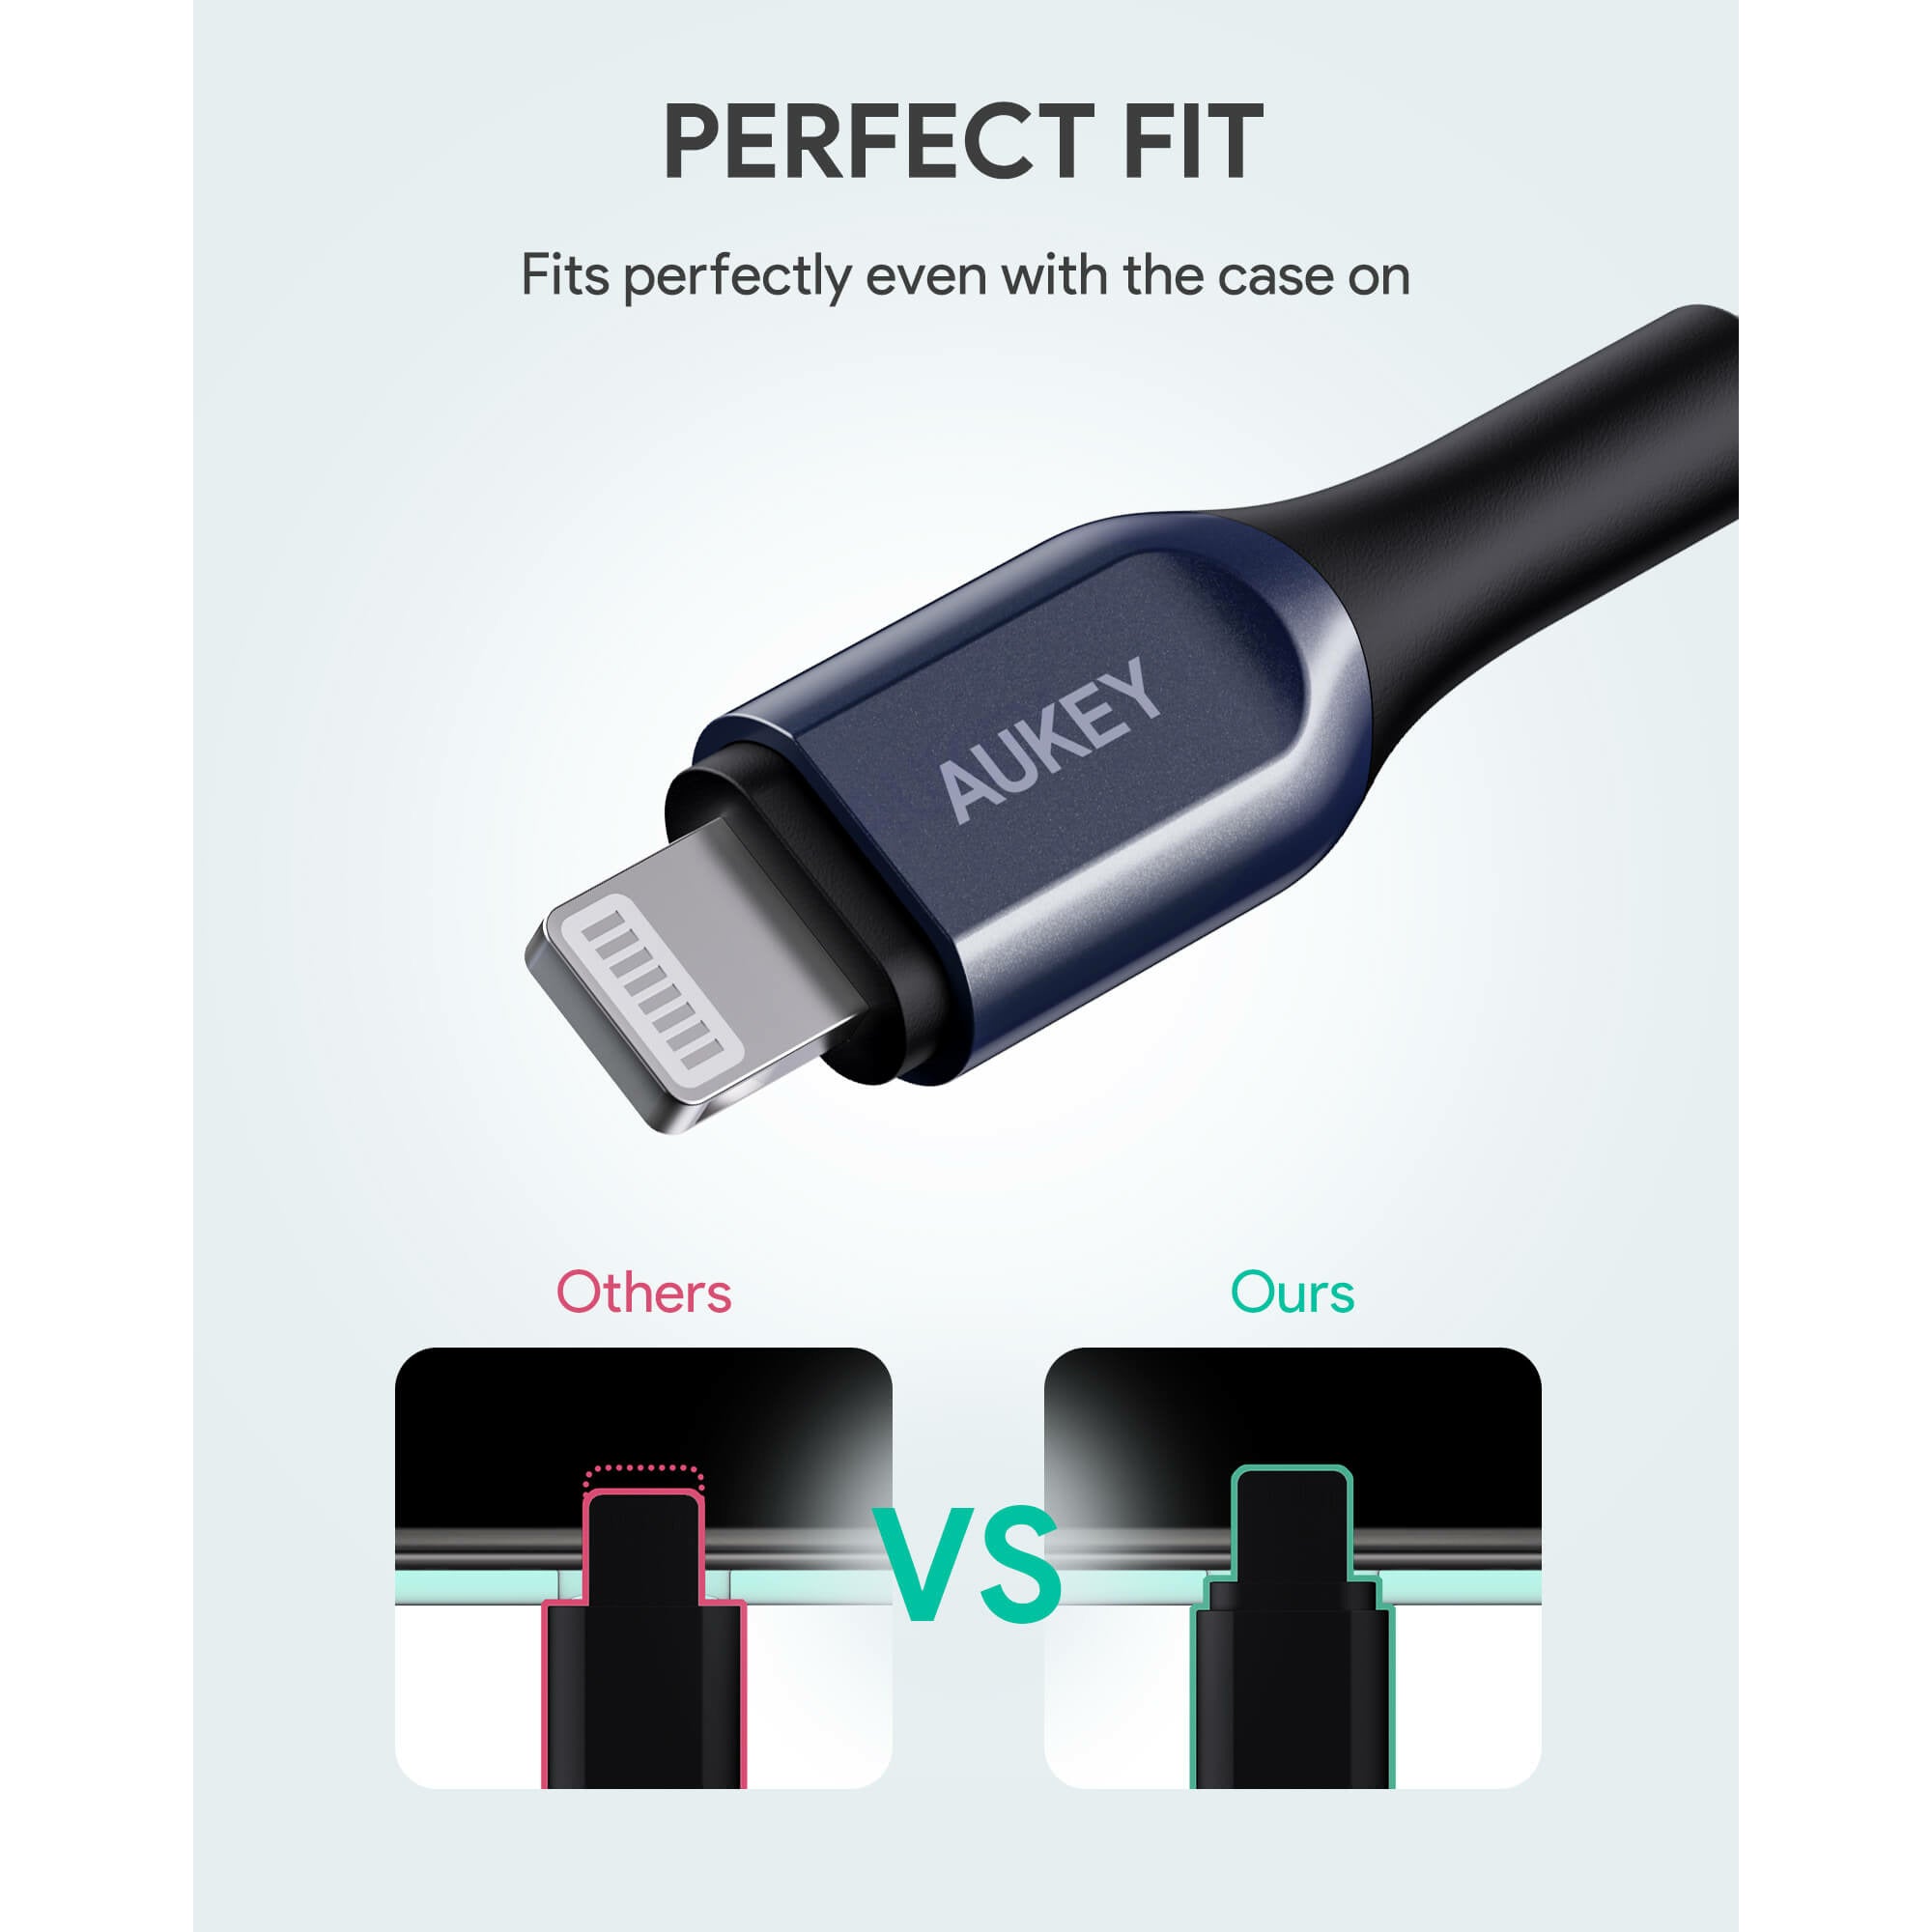 AUKEY USB-C to Lightning Cable [6.6ft Apple MFI Certified] CB-CL18